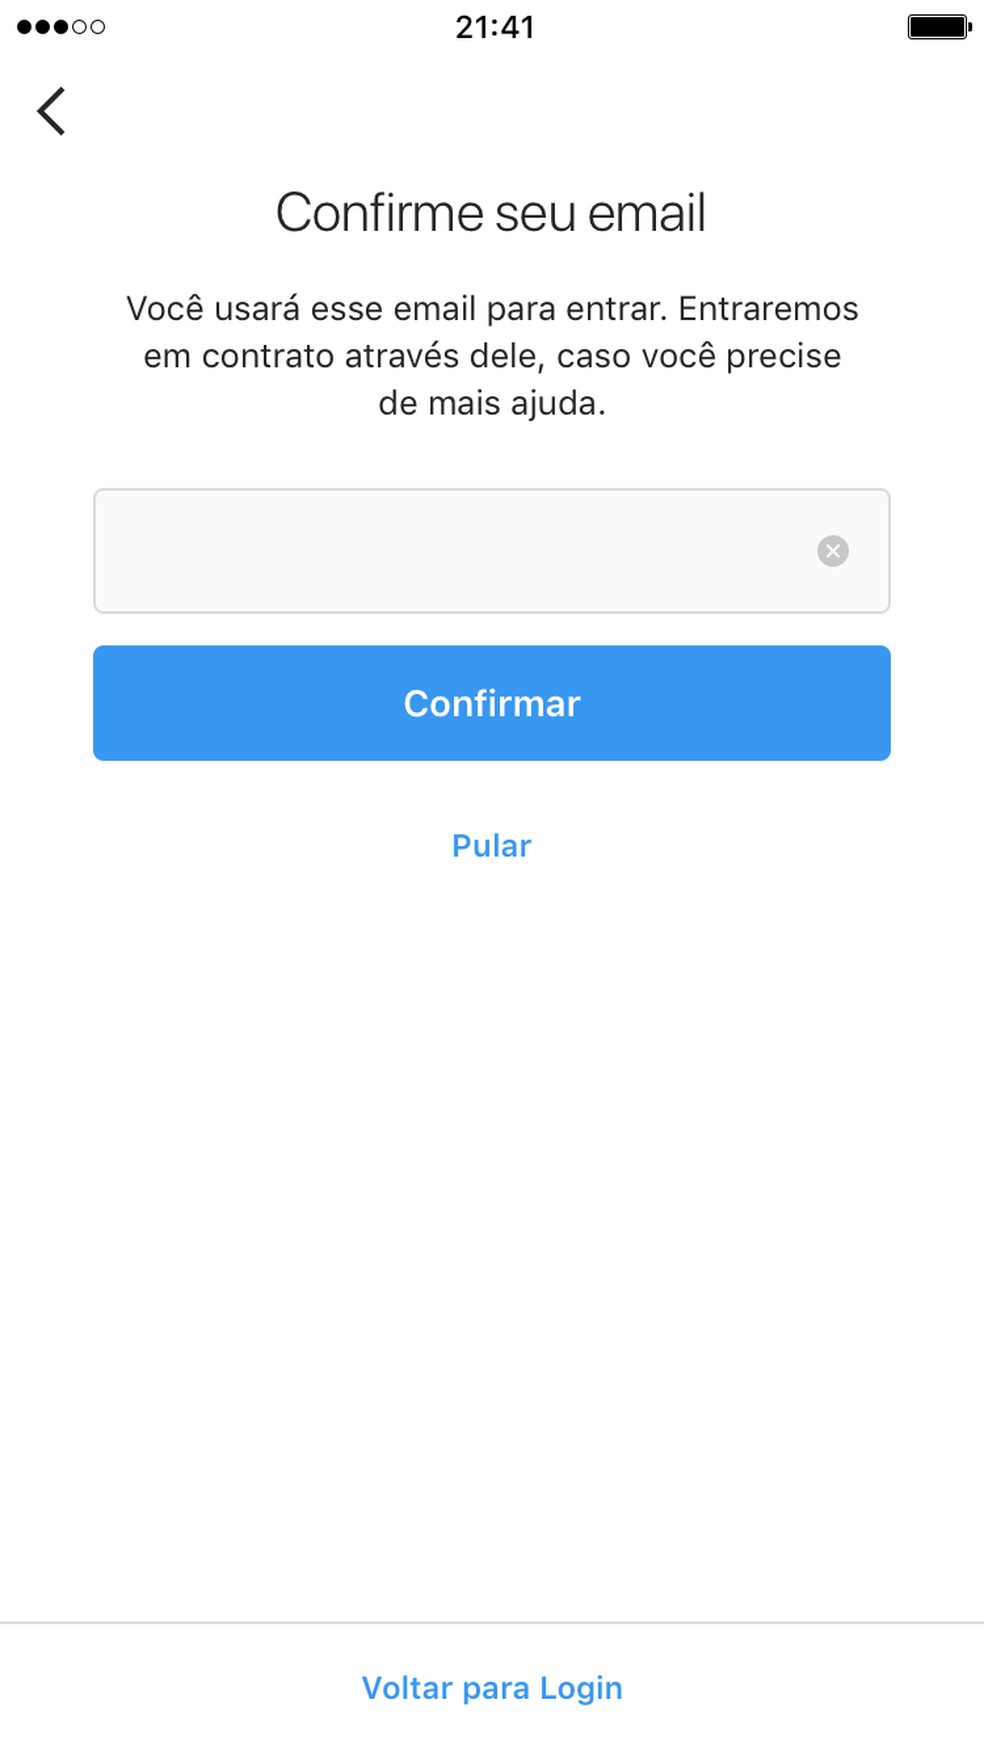 Account Recovery: Confirm Email Photo: Divulgao / Instagram